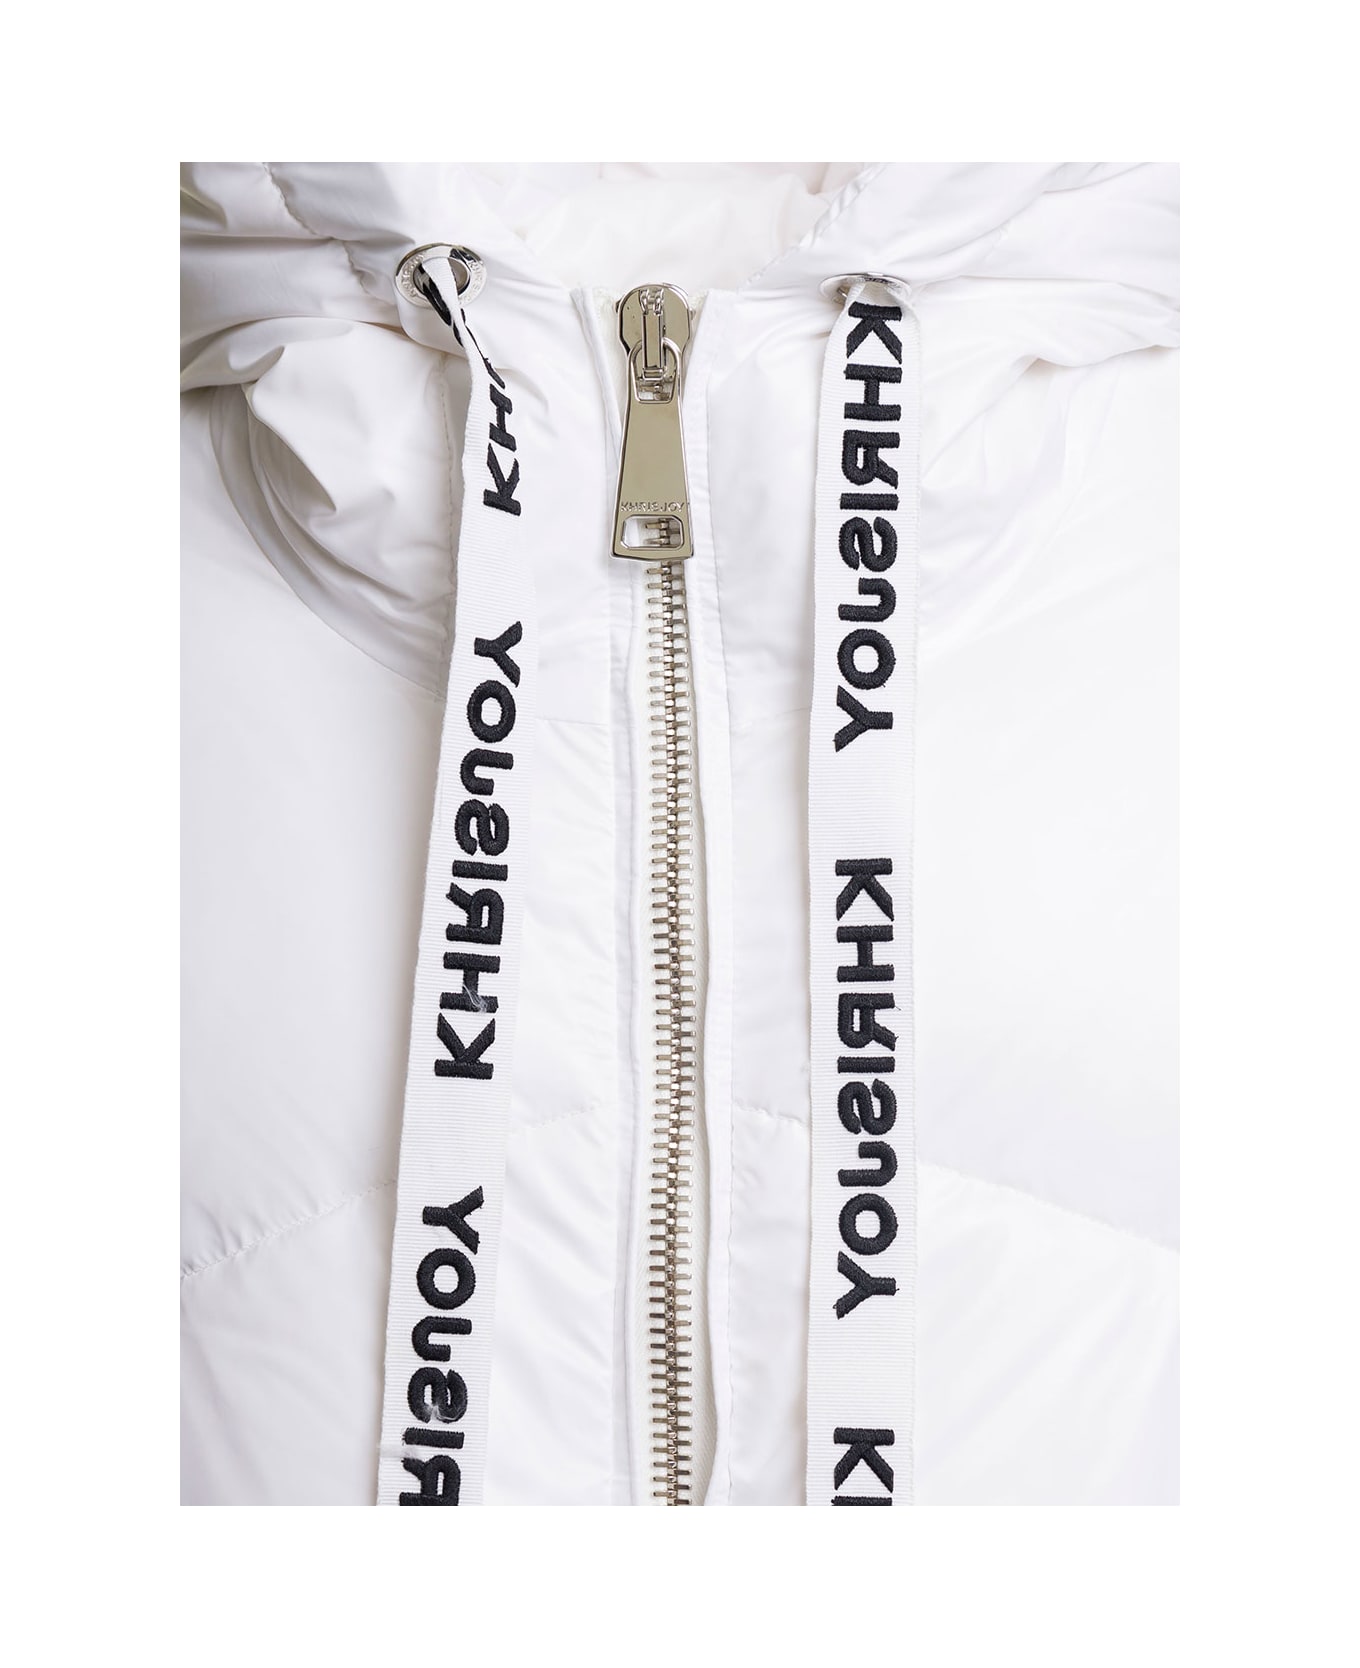 Khrisjoy White 'puff Khris Iconic' Oversized Down Jacket With Hood In Polyester Woman - White